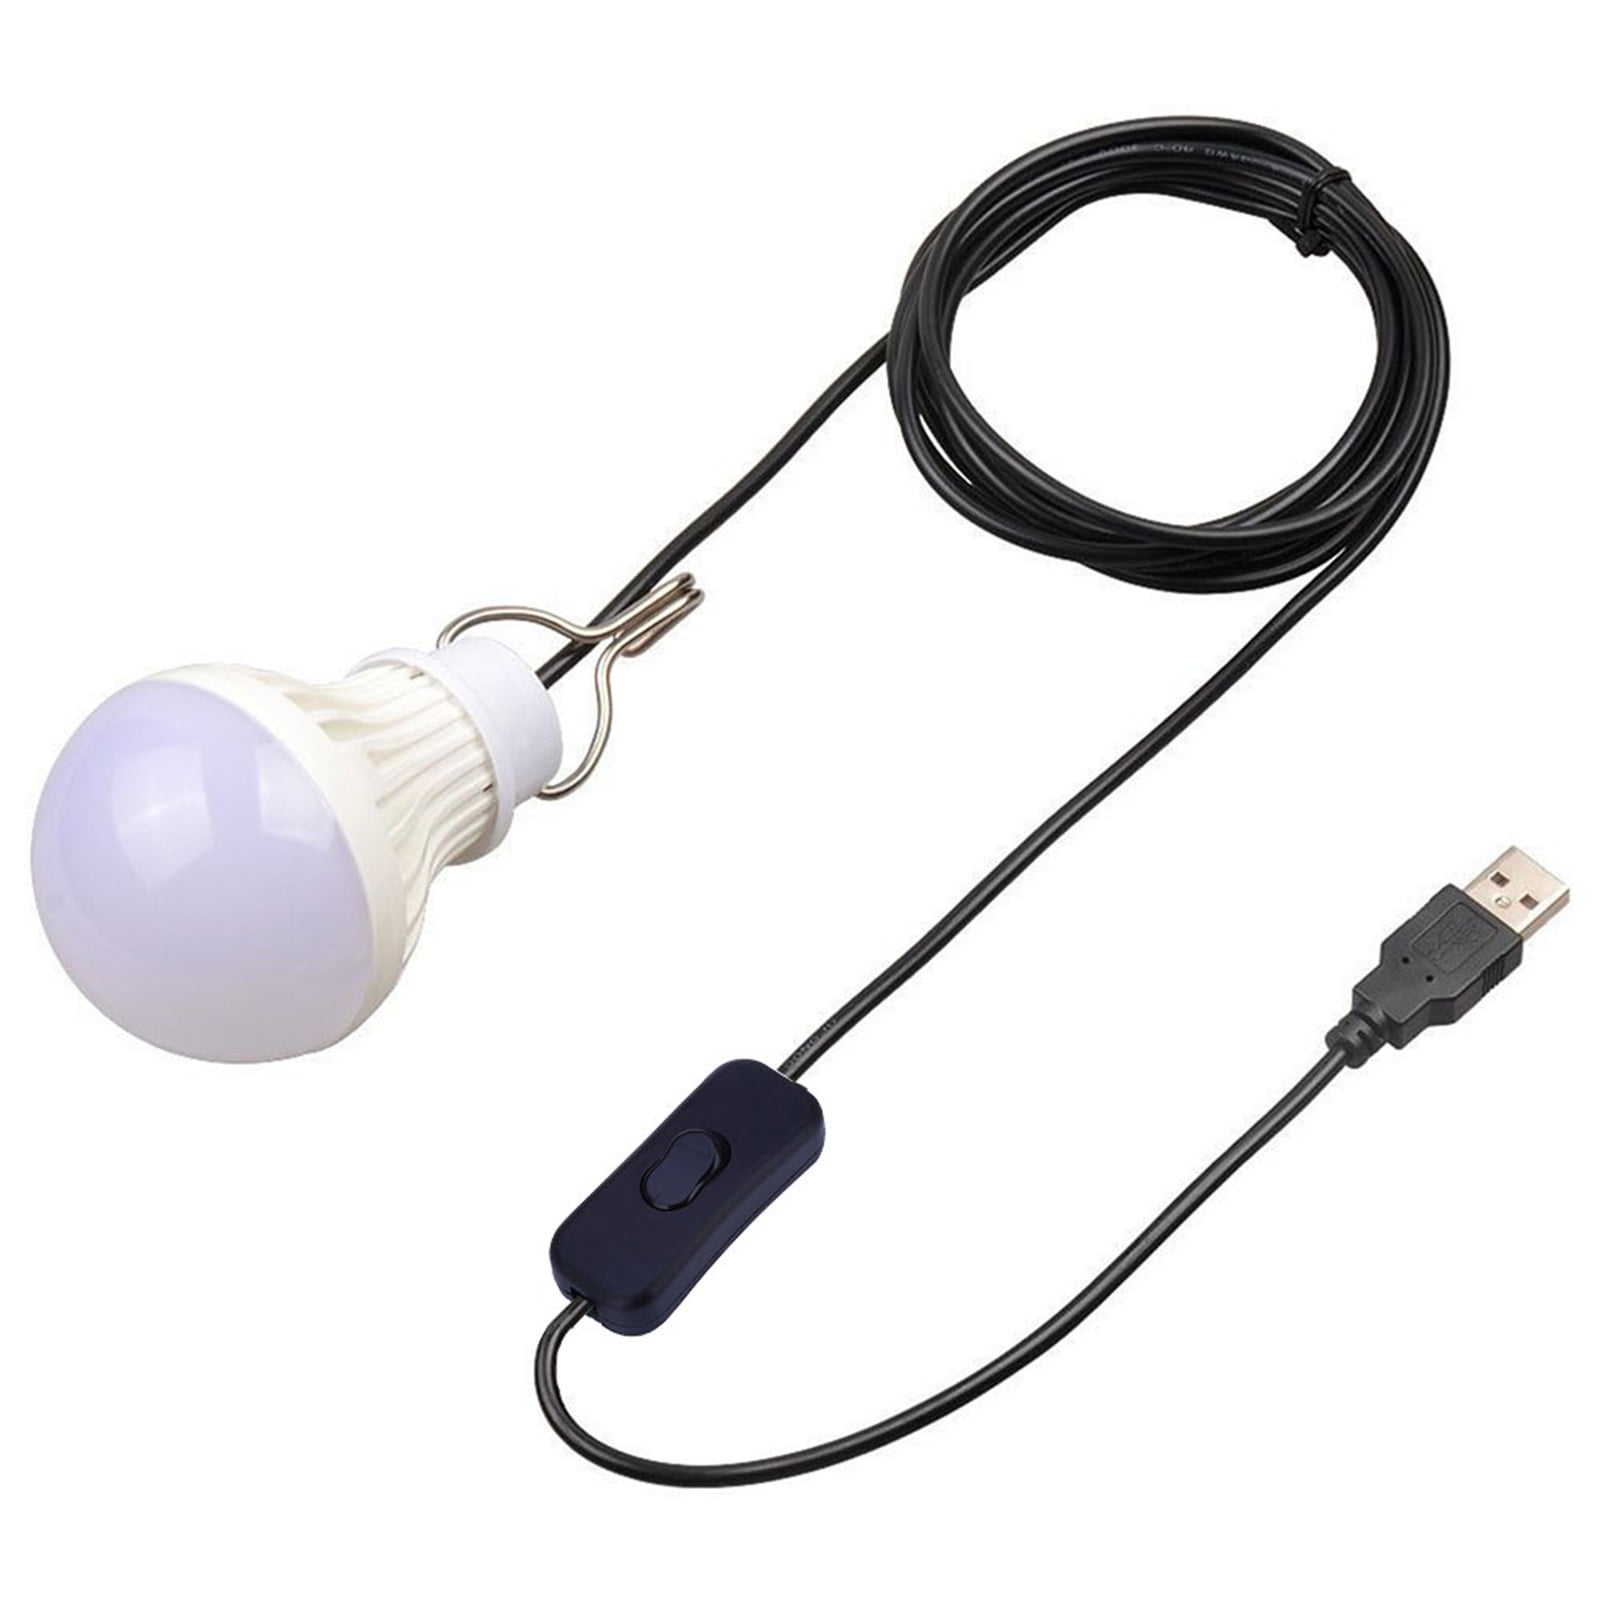 Portable 5W LED USB Switch Dimmable Camping Light Lamp Emergency Globe Bulb New 